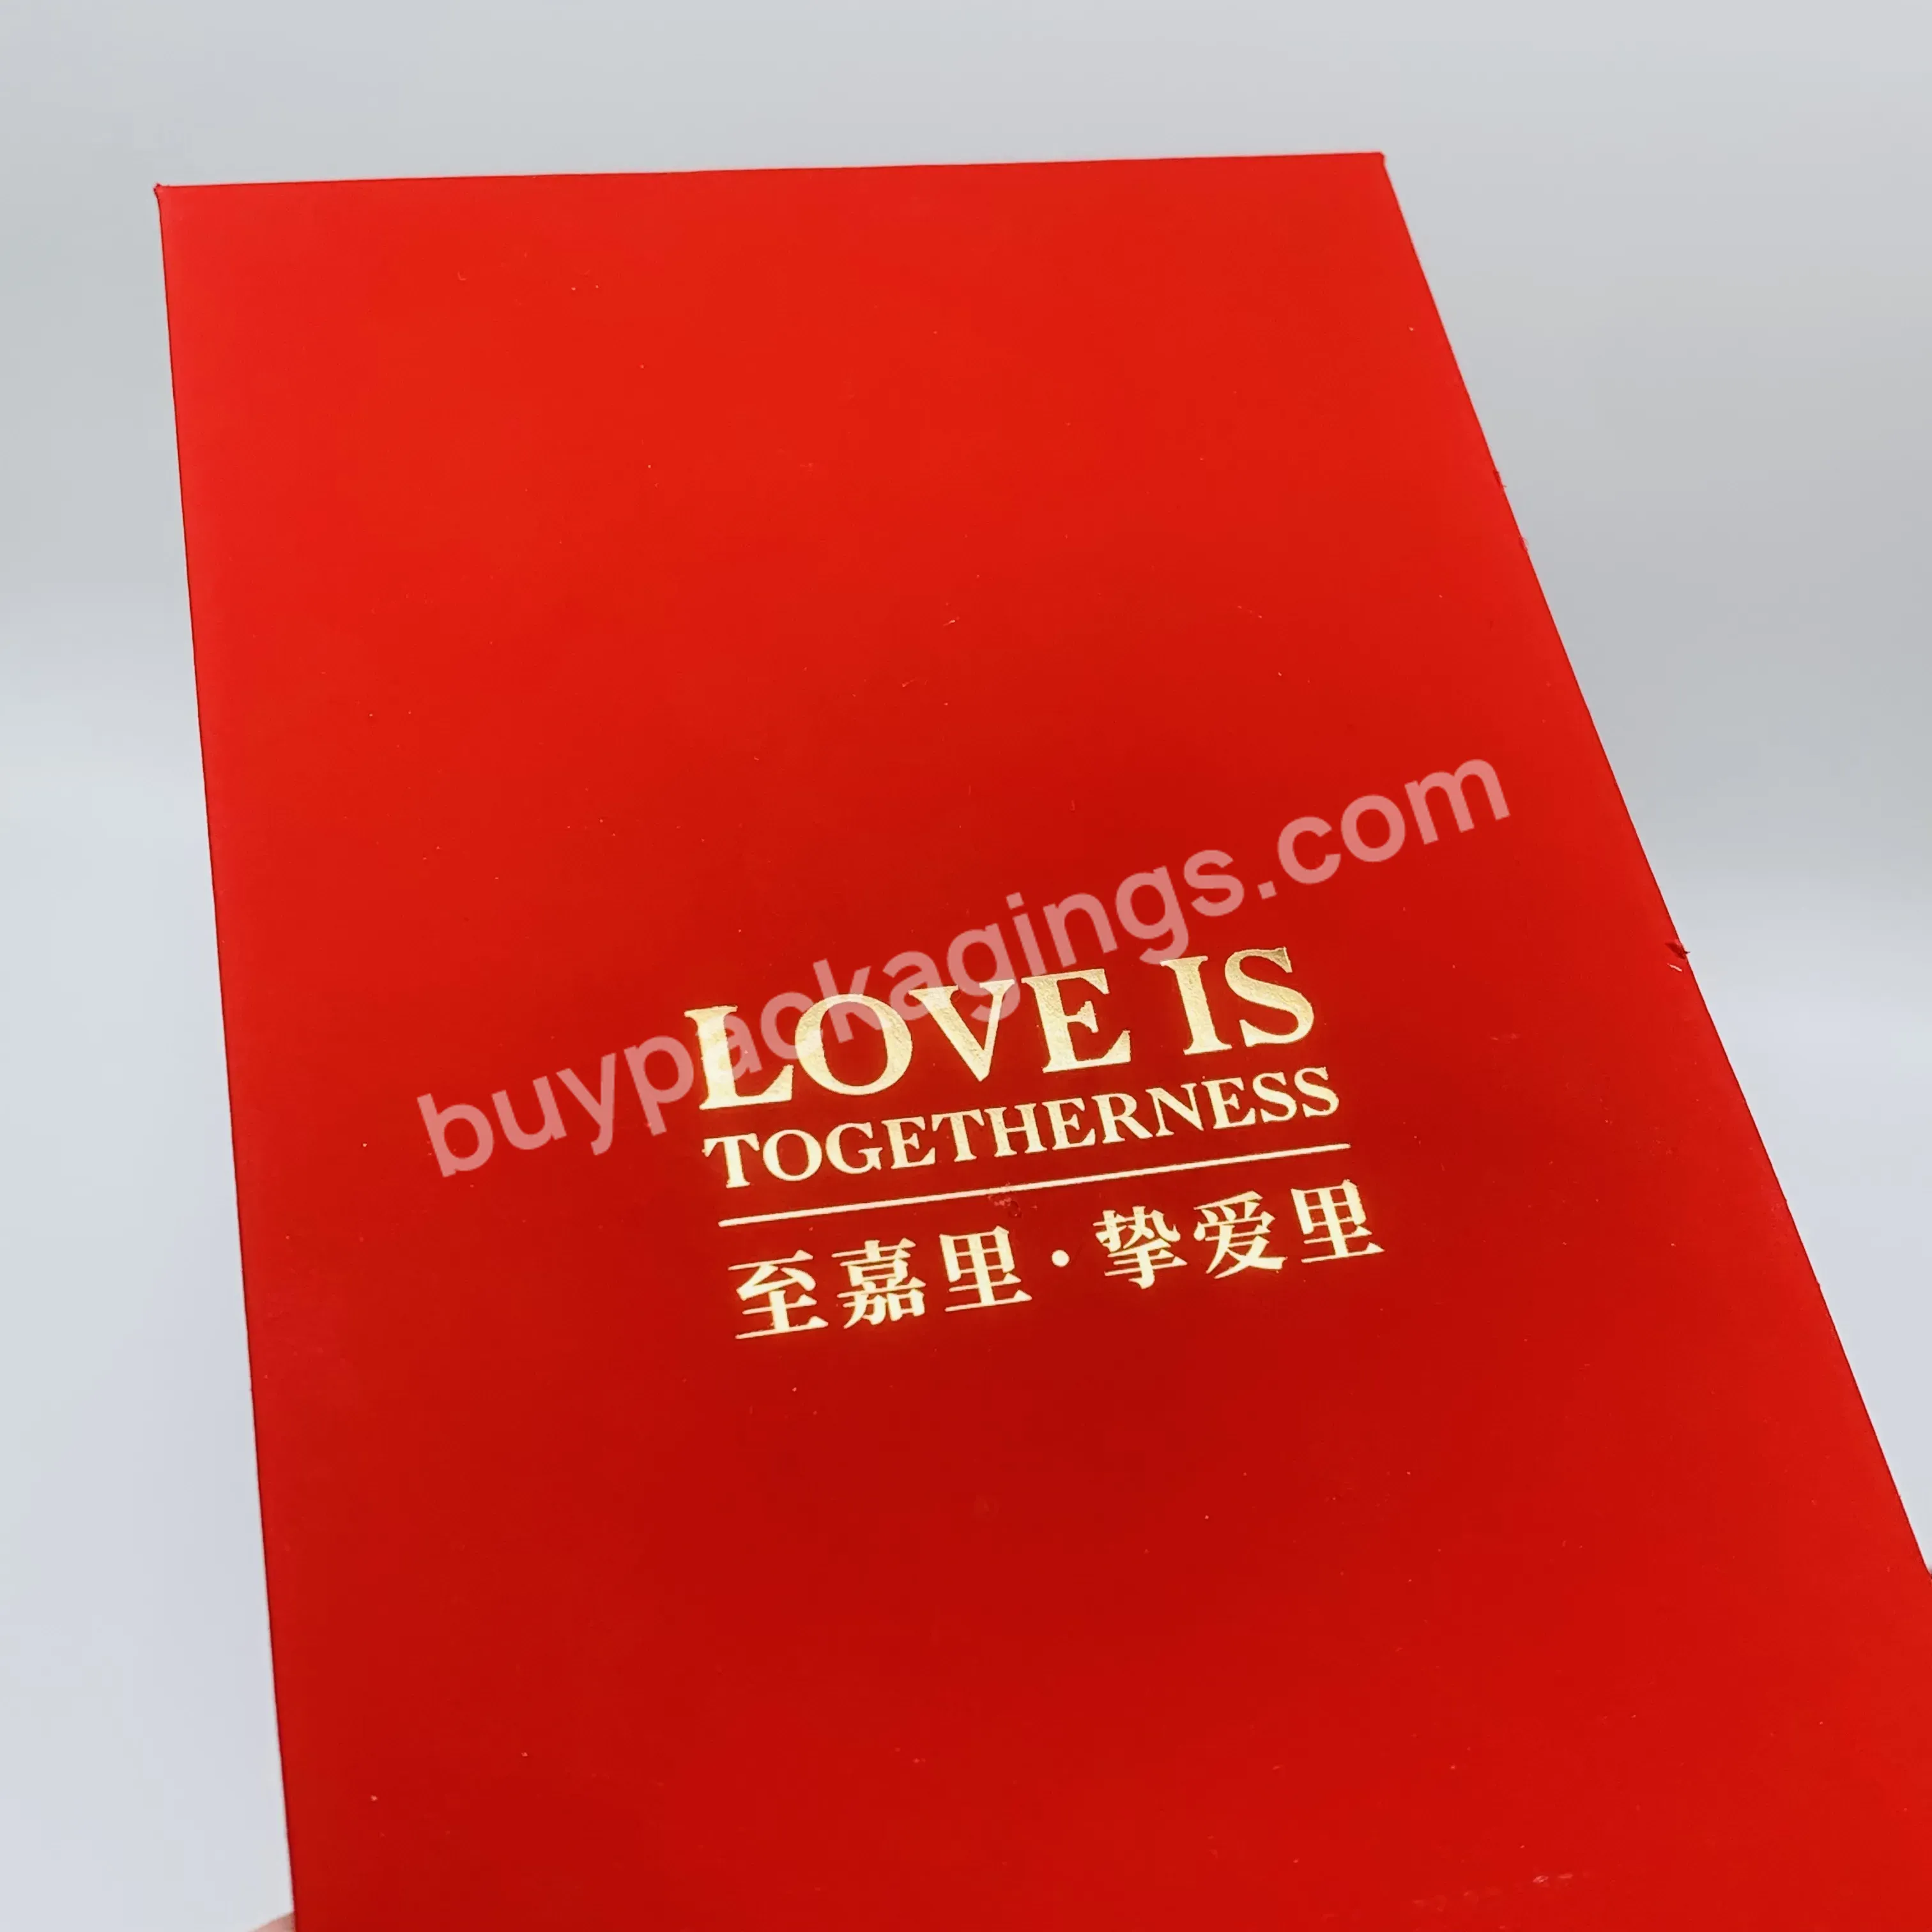 Customized Printed Red Packet Design Cny Chinese New Year Art Paper Lucky Pocket Money Wallet Gift Envelope - Buy Cny Red Pocket Envelope,Red Pocket Envelope Design,Red Packet Lucky Money.